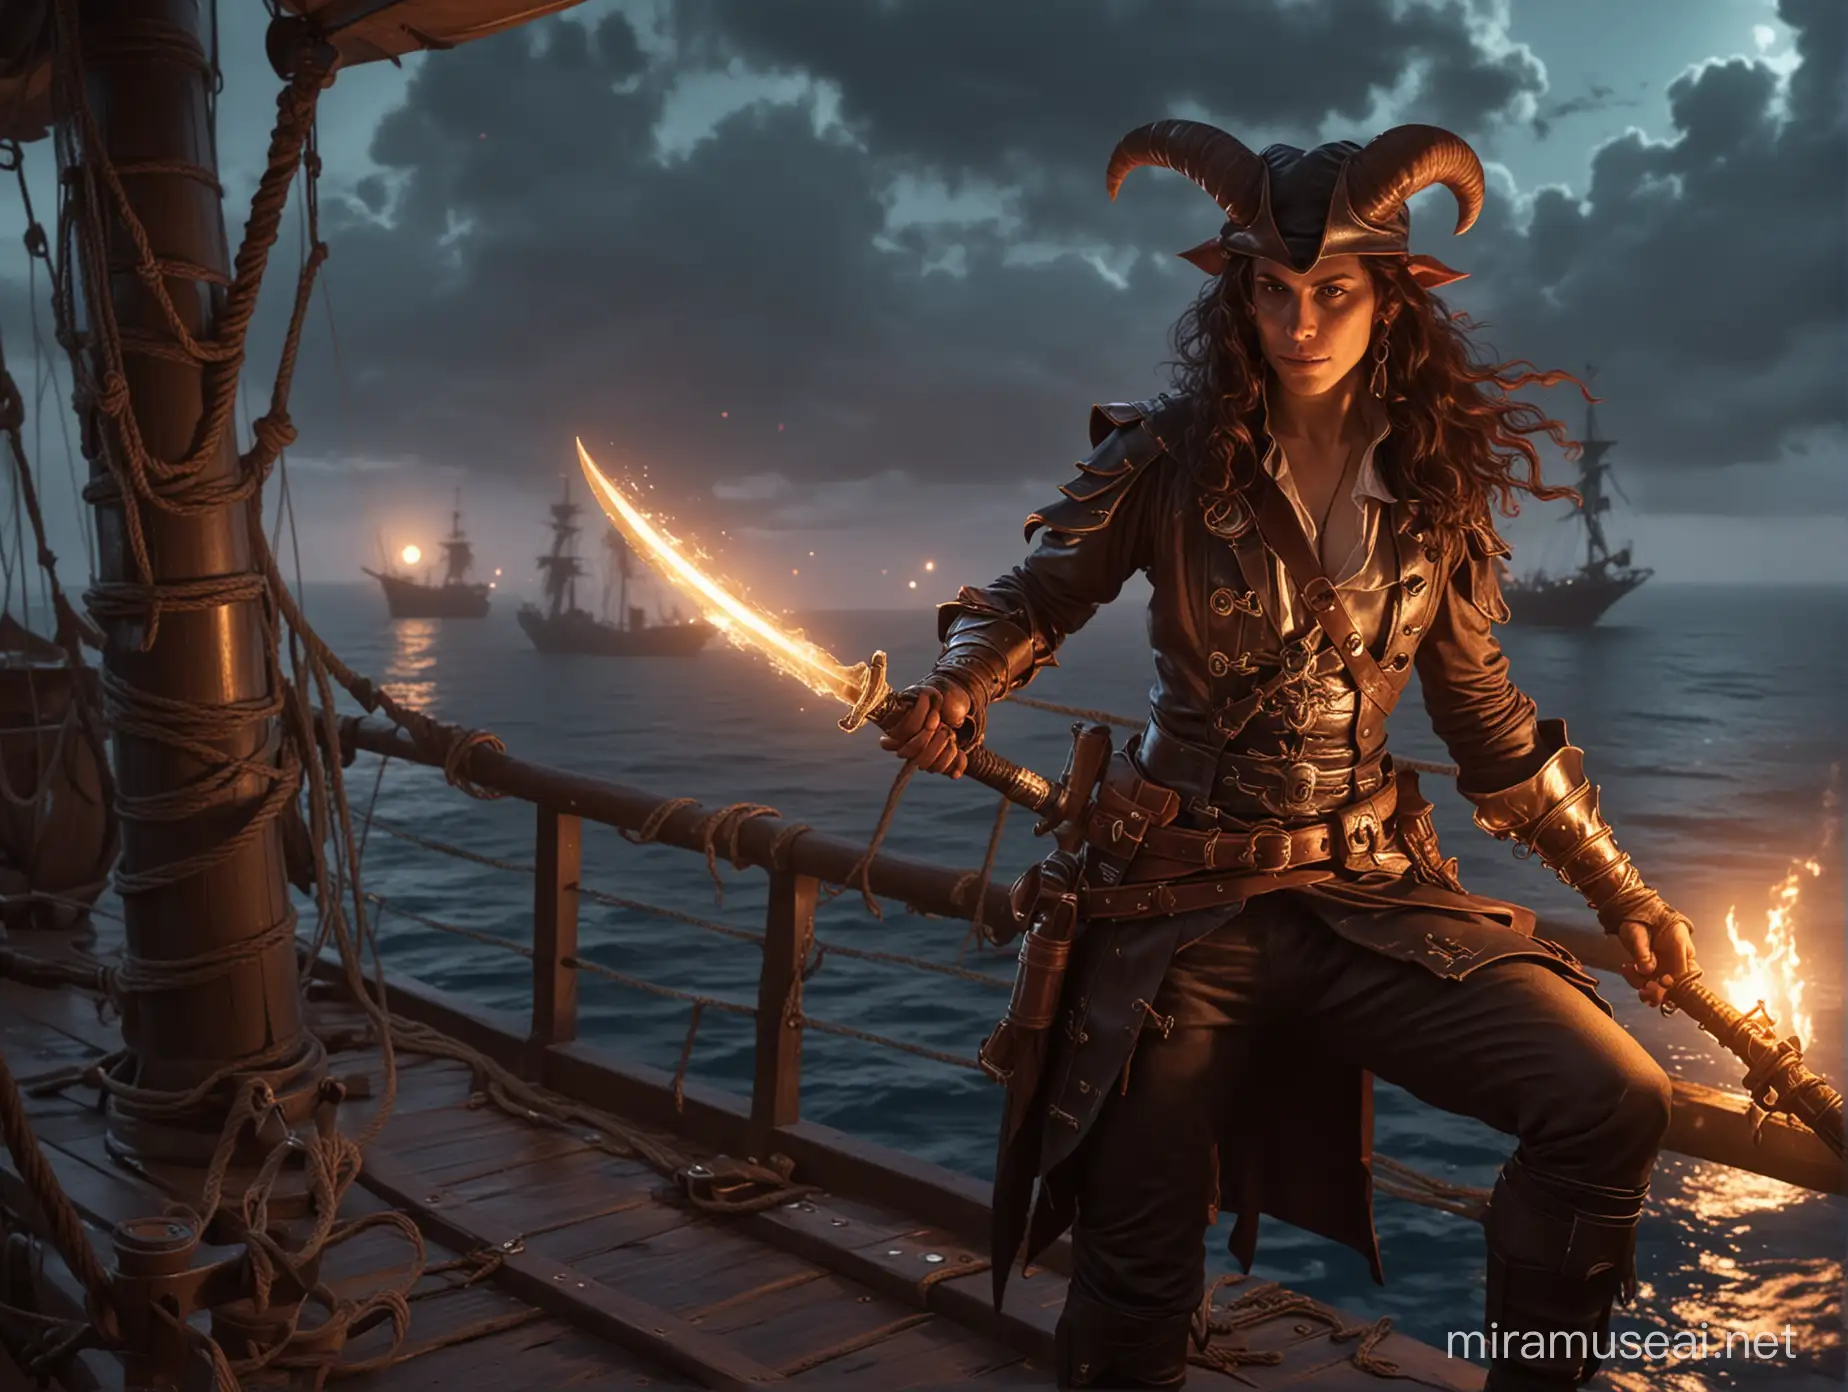 tiefling pirate captain on a ship deck hodling a glowing sword